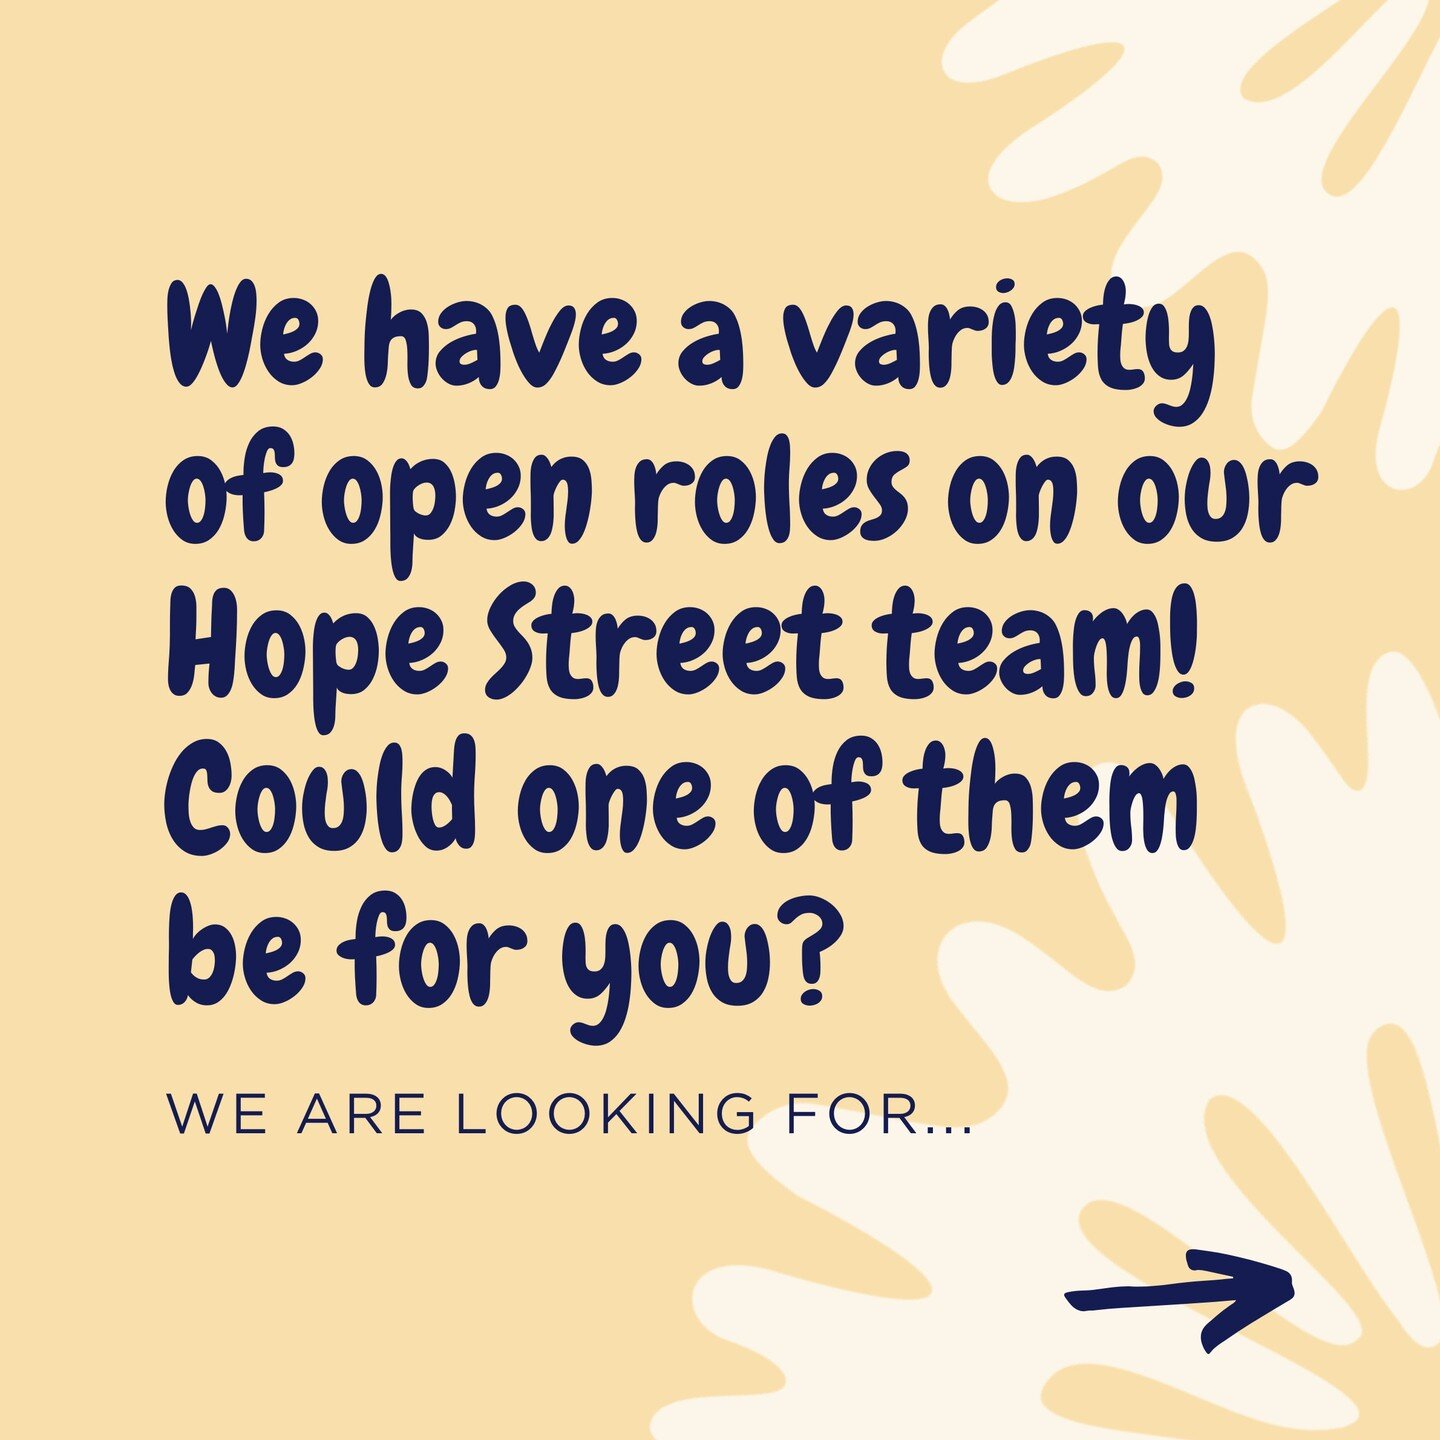 #Joinourteam📣 We have a variety of roles open on our #HopeStreet team! If you're passionate about our mission to redesign the way the #justicesystem responds to women and their children, we want to hear from you! 

Find all the details via the link 